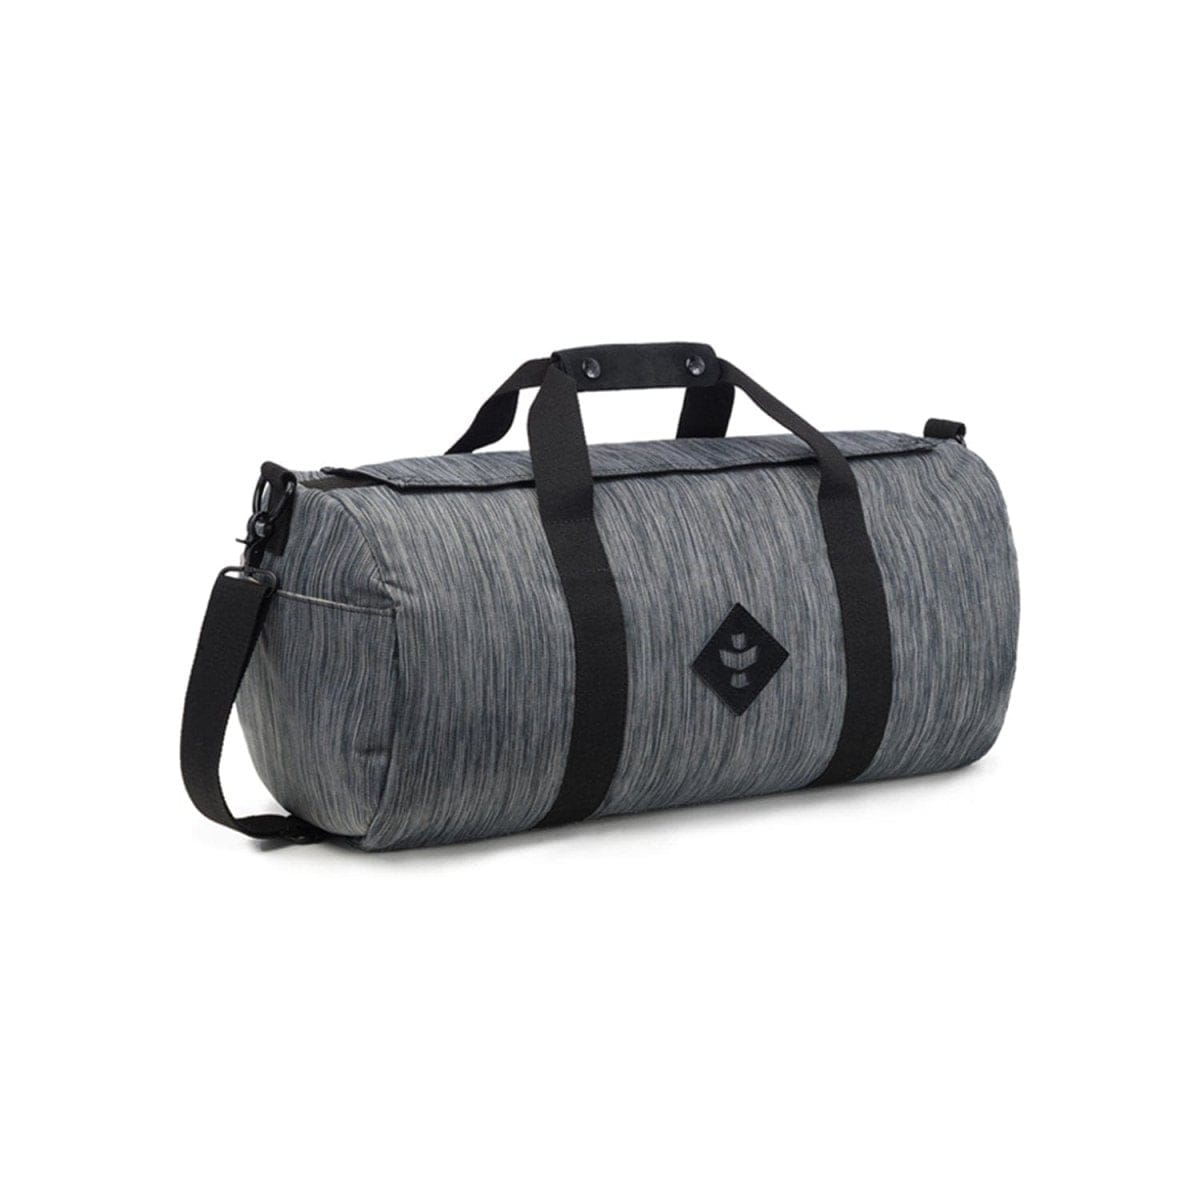 Revelry Supply Travel Bag Striped Dark Grey The Overnighter - Smell Proof Small Duffle